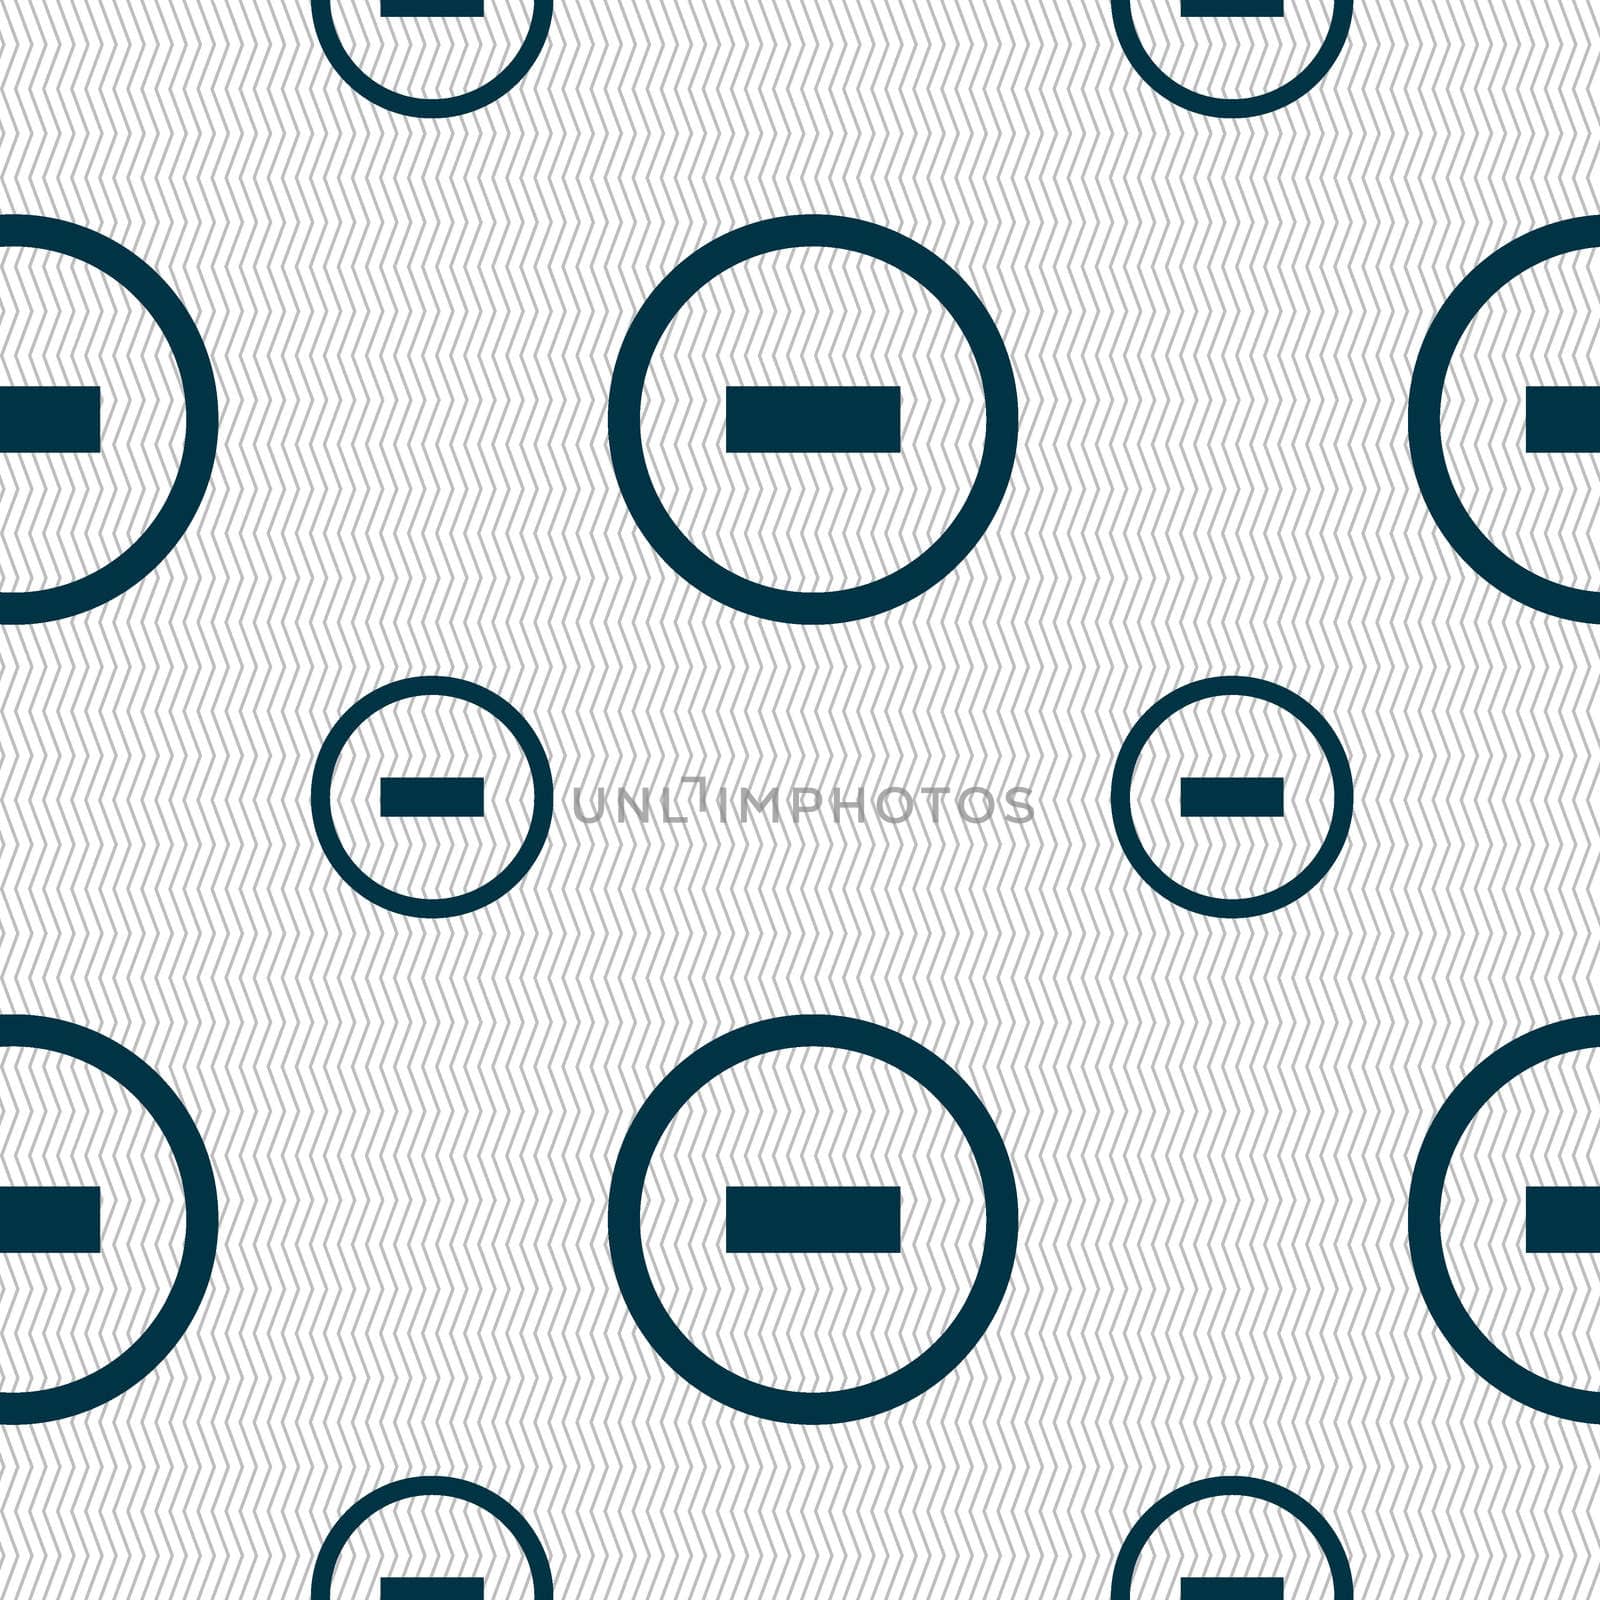 Minus sign icon. Negative symbol. Zoom out. Seamless pattern with geometric texture. illustration